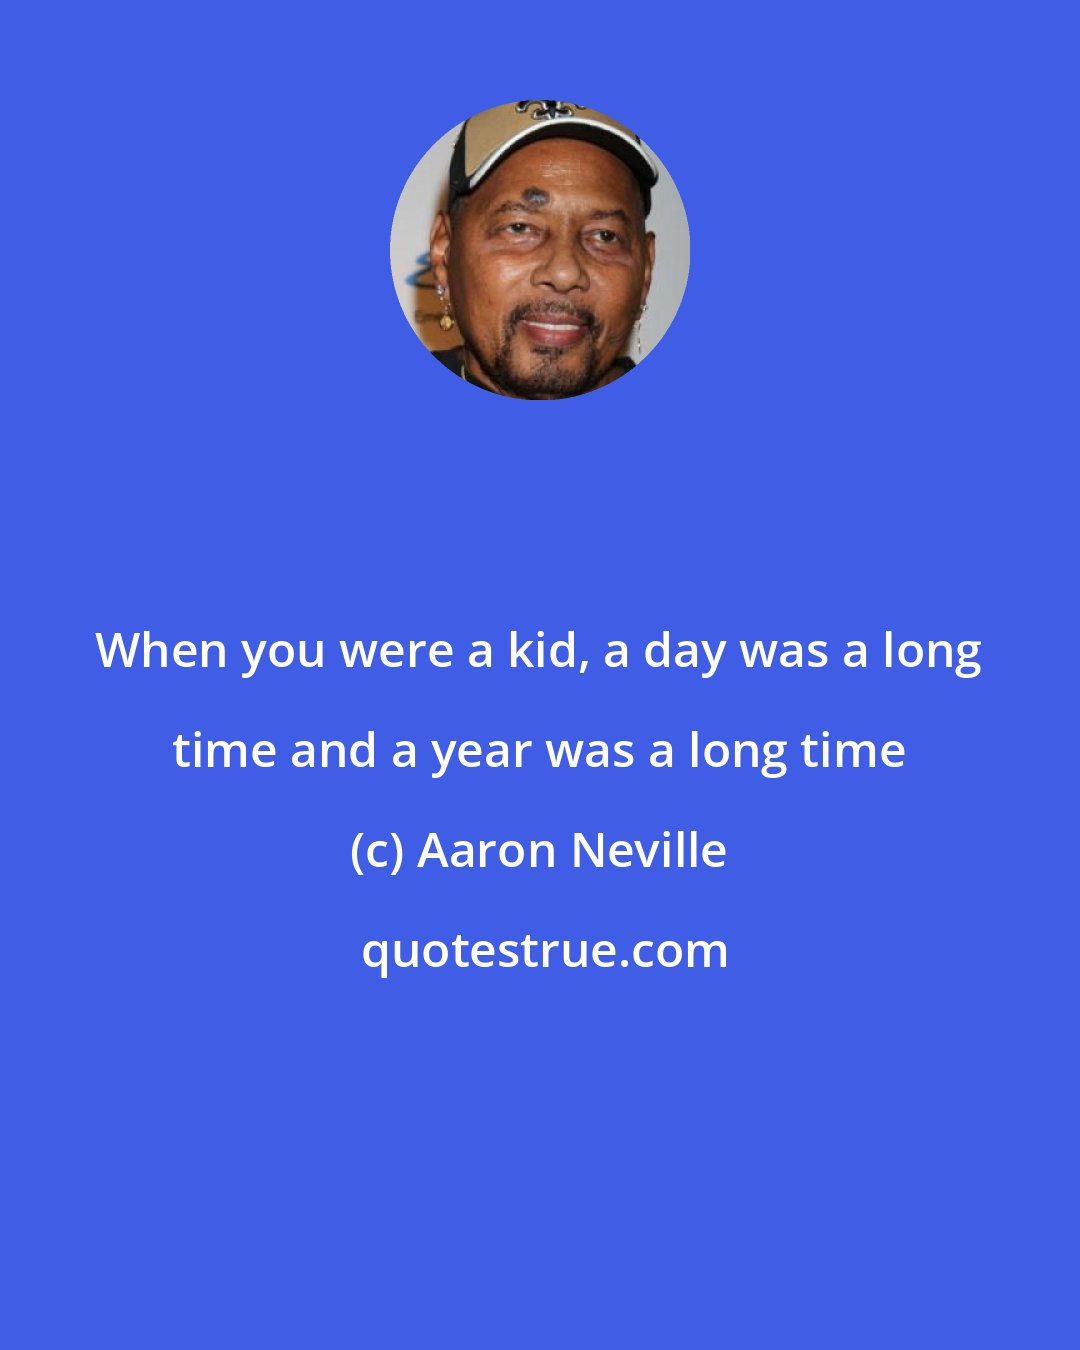 Aaron Neville: When you were a kid, a day was a long time and a year was a long time